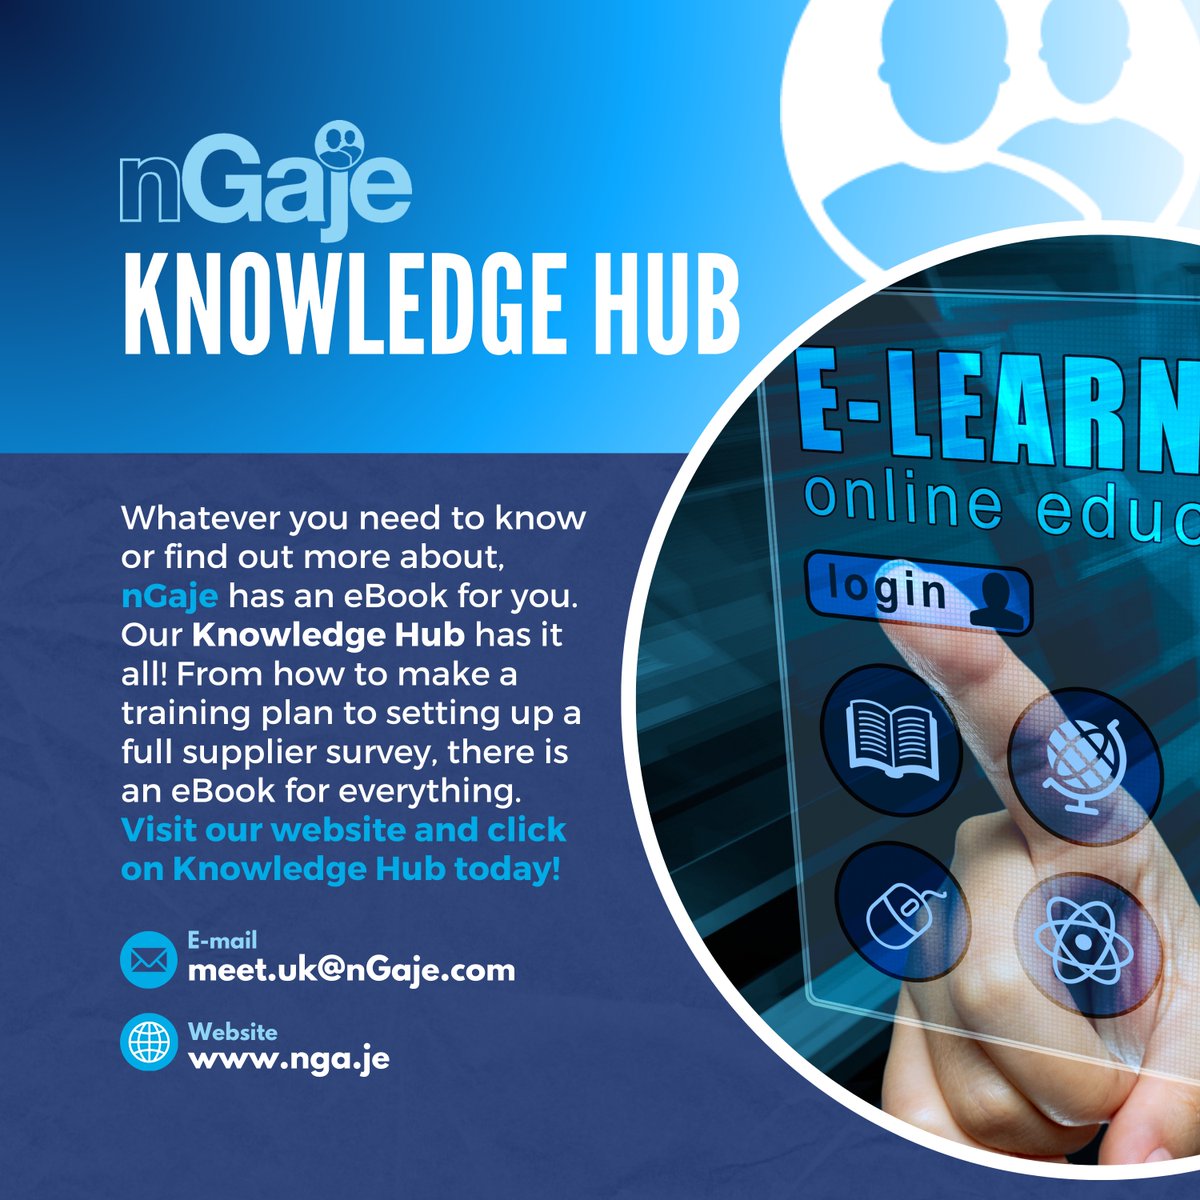 Our Knowledge Hub is the place to be! Brush up on your skills or browse through our eBooks to learn more about what we do. Just visit the website to find out more! nga.je #knowledgehub #ebooks #information #howtoguides